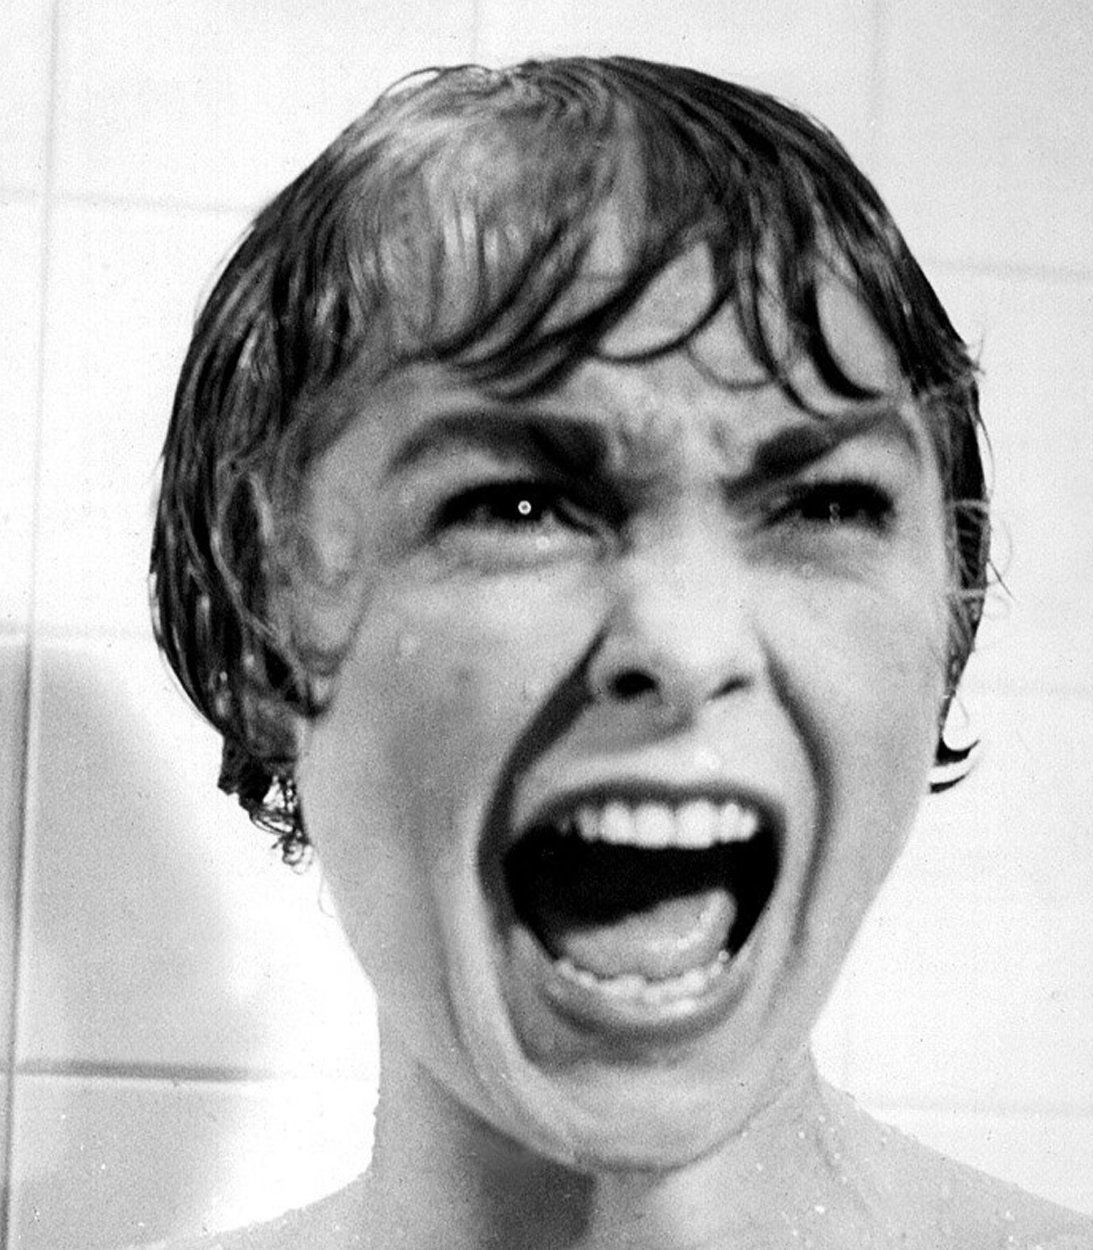 psycho janet leigh TLDR vertical